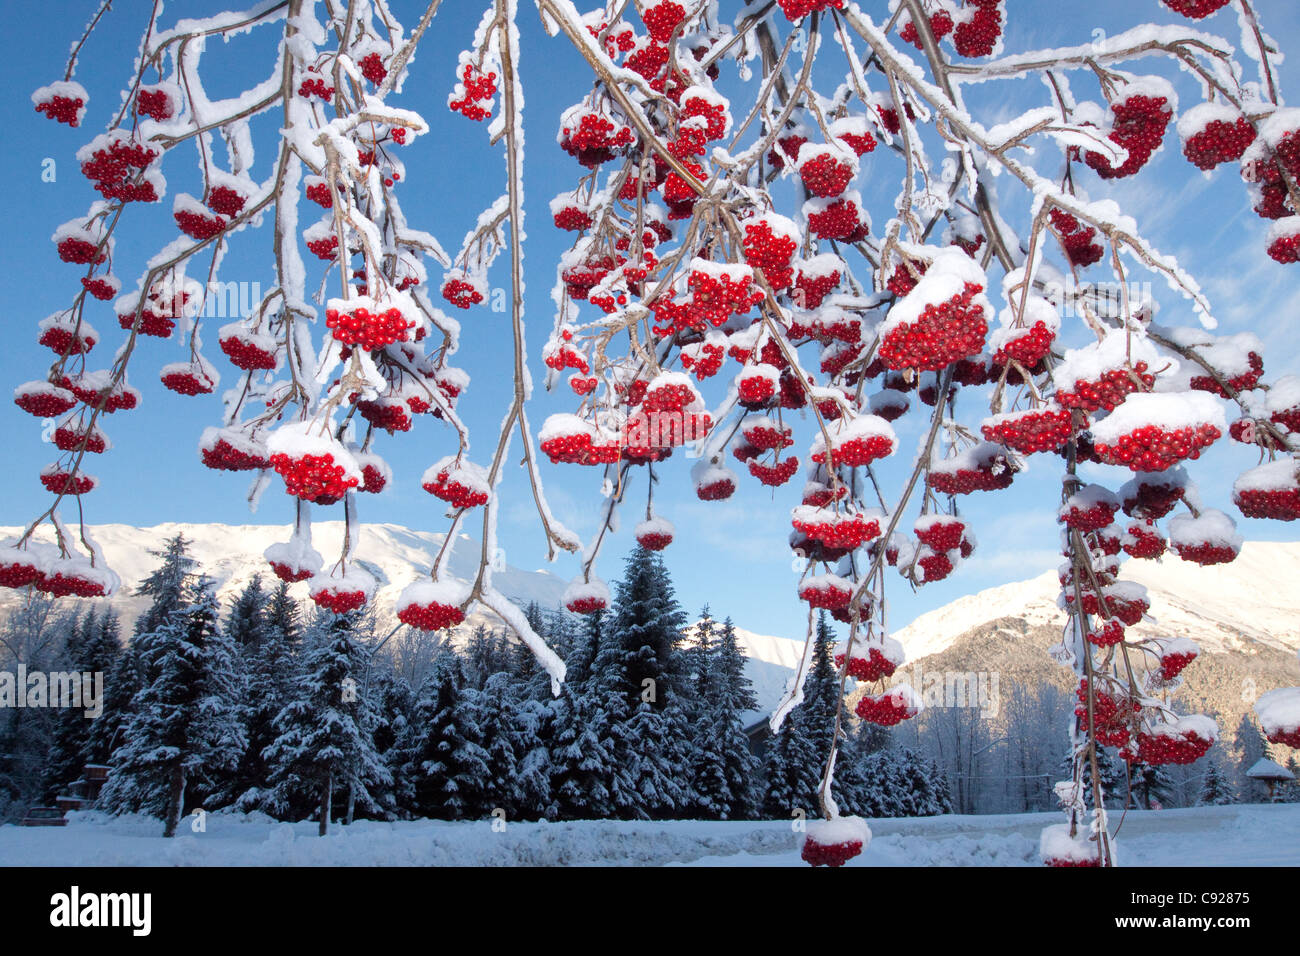 Bright red snow-covered Mountain Ash berries hang down from branches with scenic winterscape in the background, Alaska Stock Photo